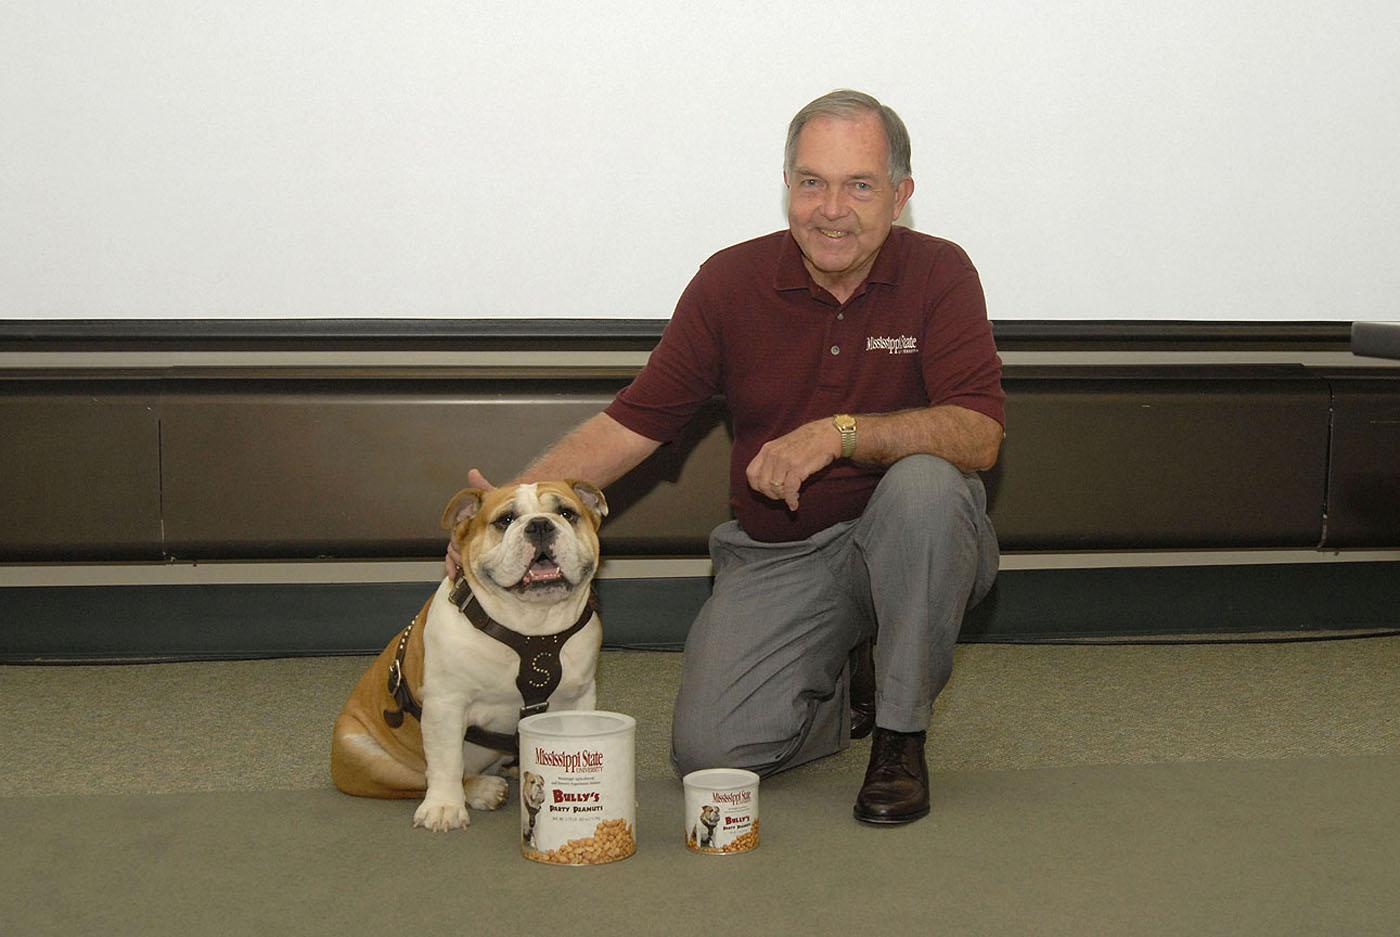 The Mississippi State University Cheese Store now sells peanuts to help promote consumption in the state. Pictured with two of the products are Bully, MSU's mascot, and Dr. Vance Watson, vice president for the Division of Agriculture, Forestry and Veterinary Medicine. Photo by Tom Thompson.